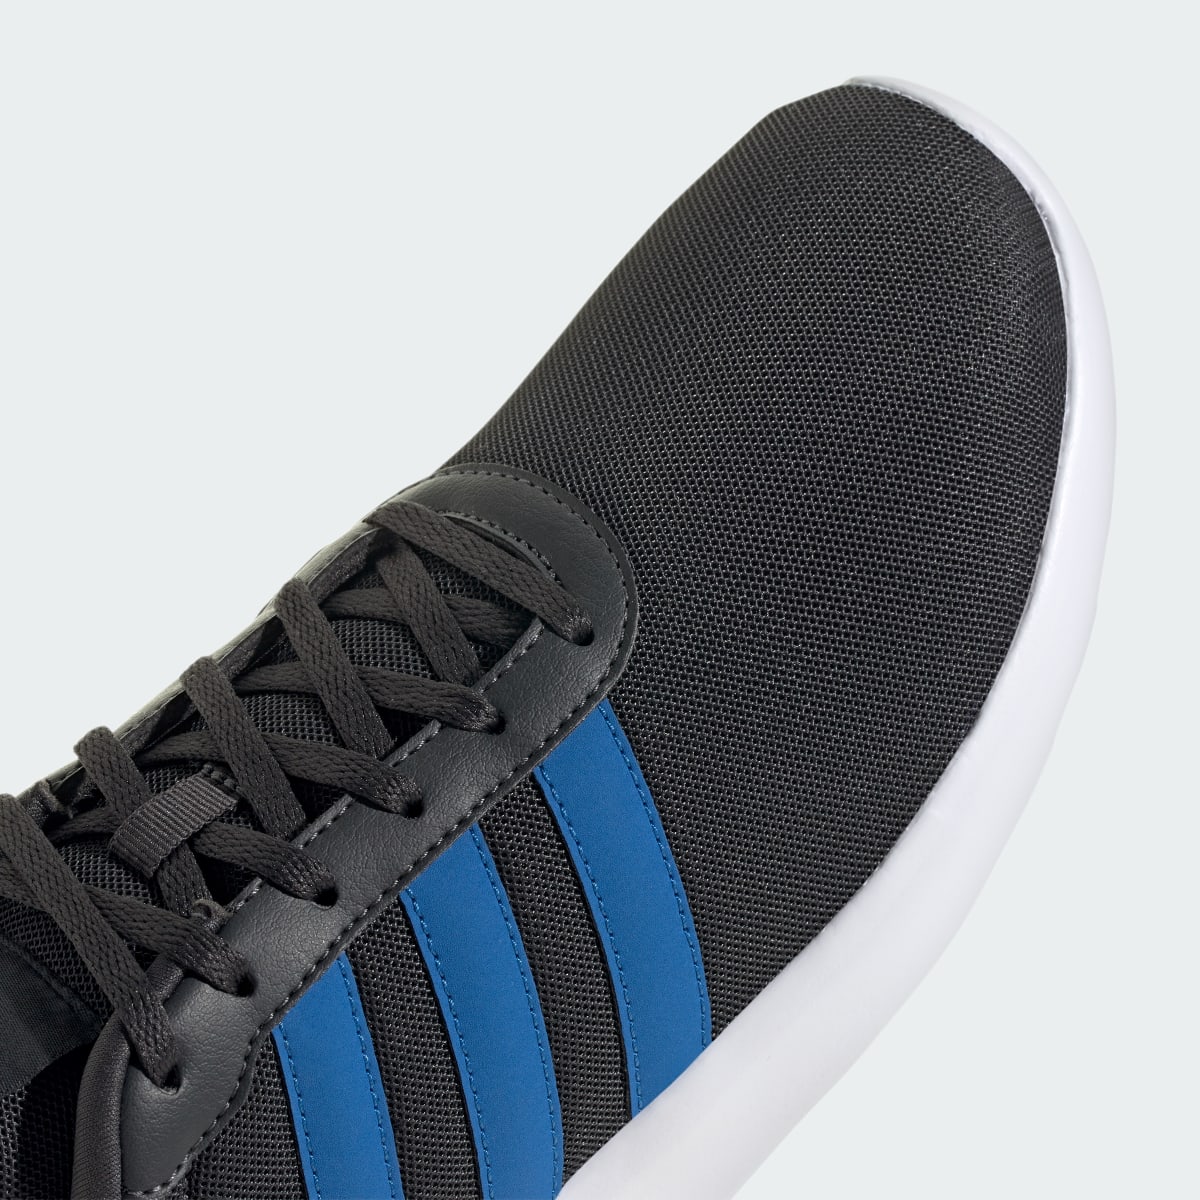 Adidas Lite Racer 3.0 Shoes. 10